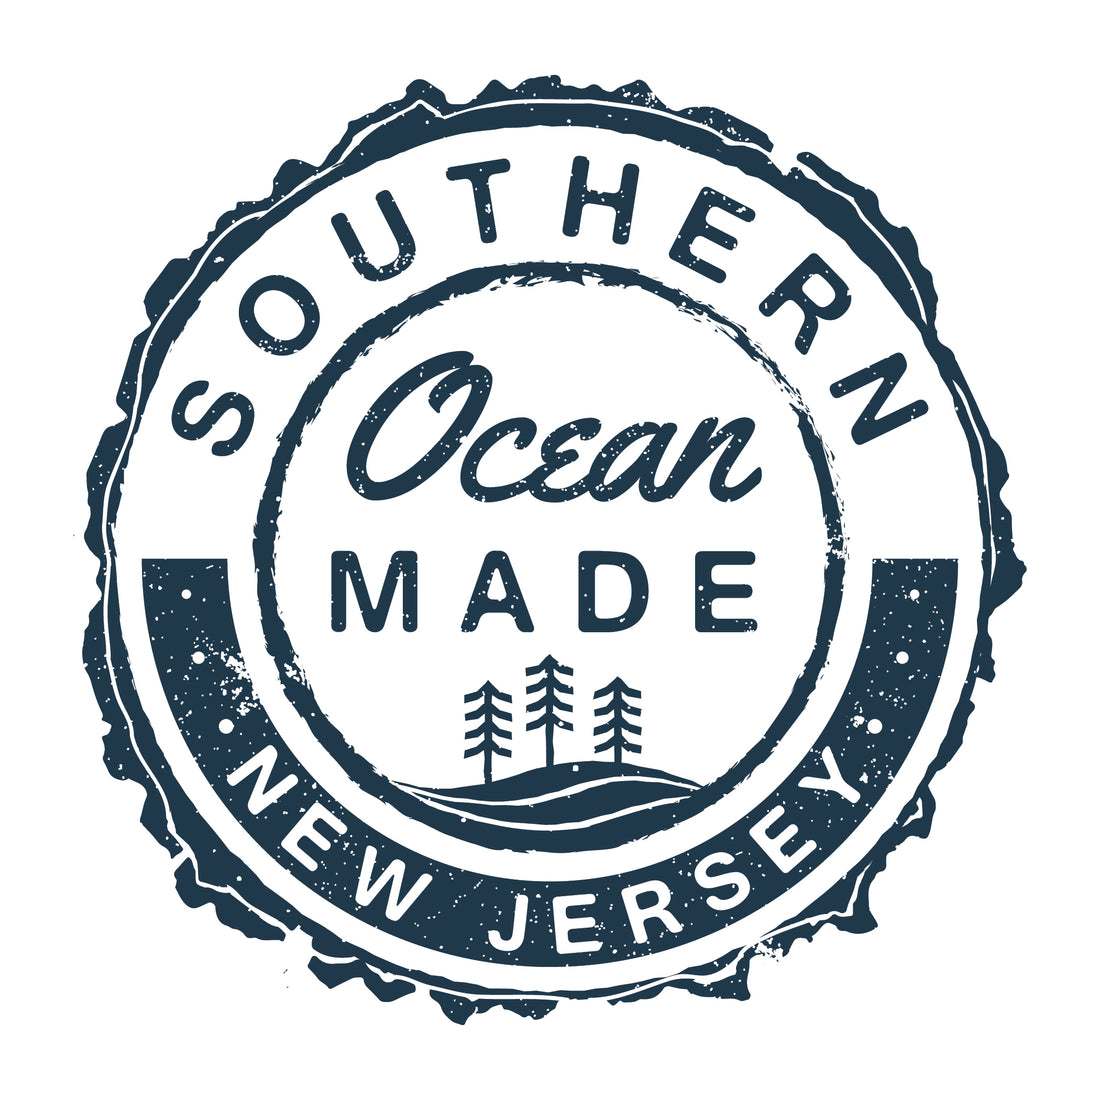 Southern Ocean Made